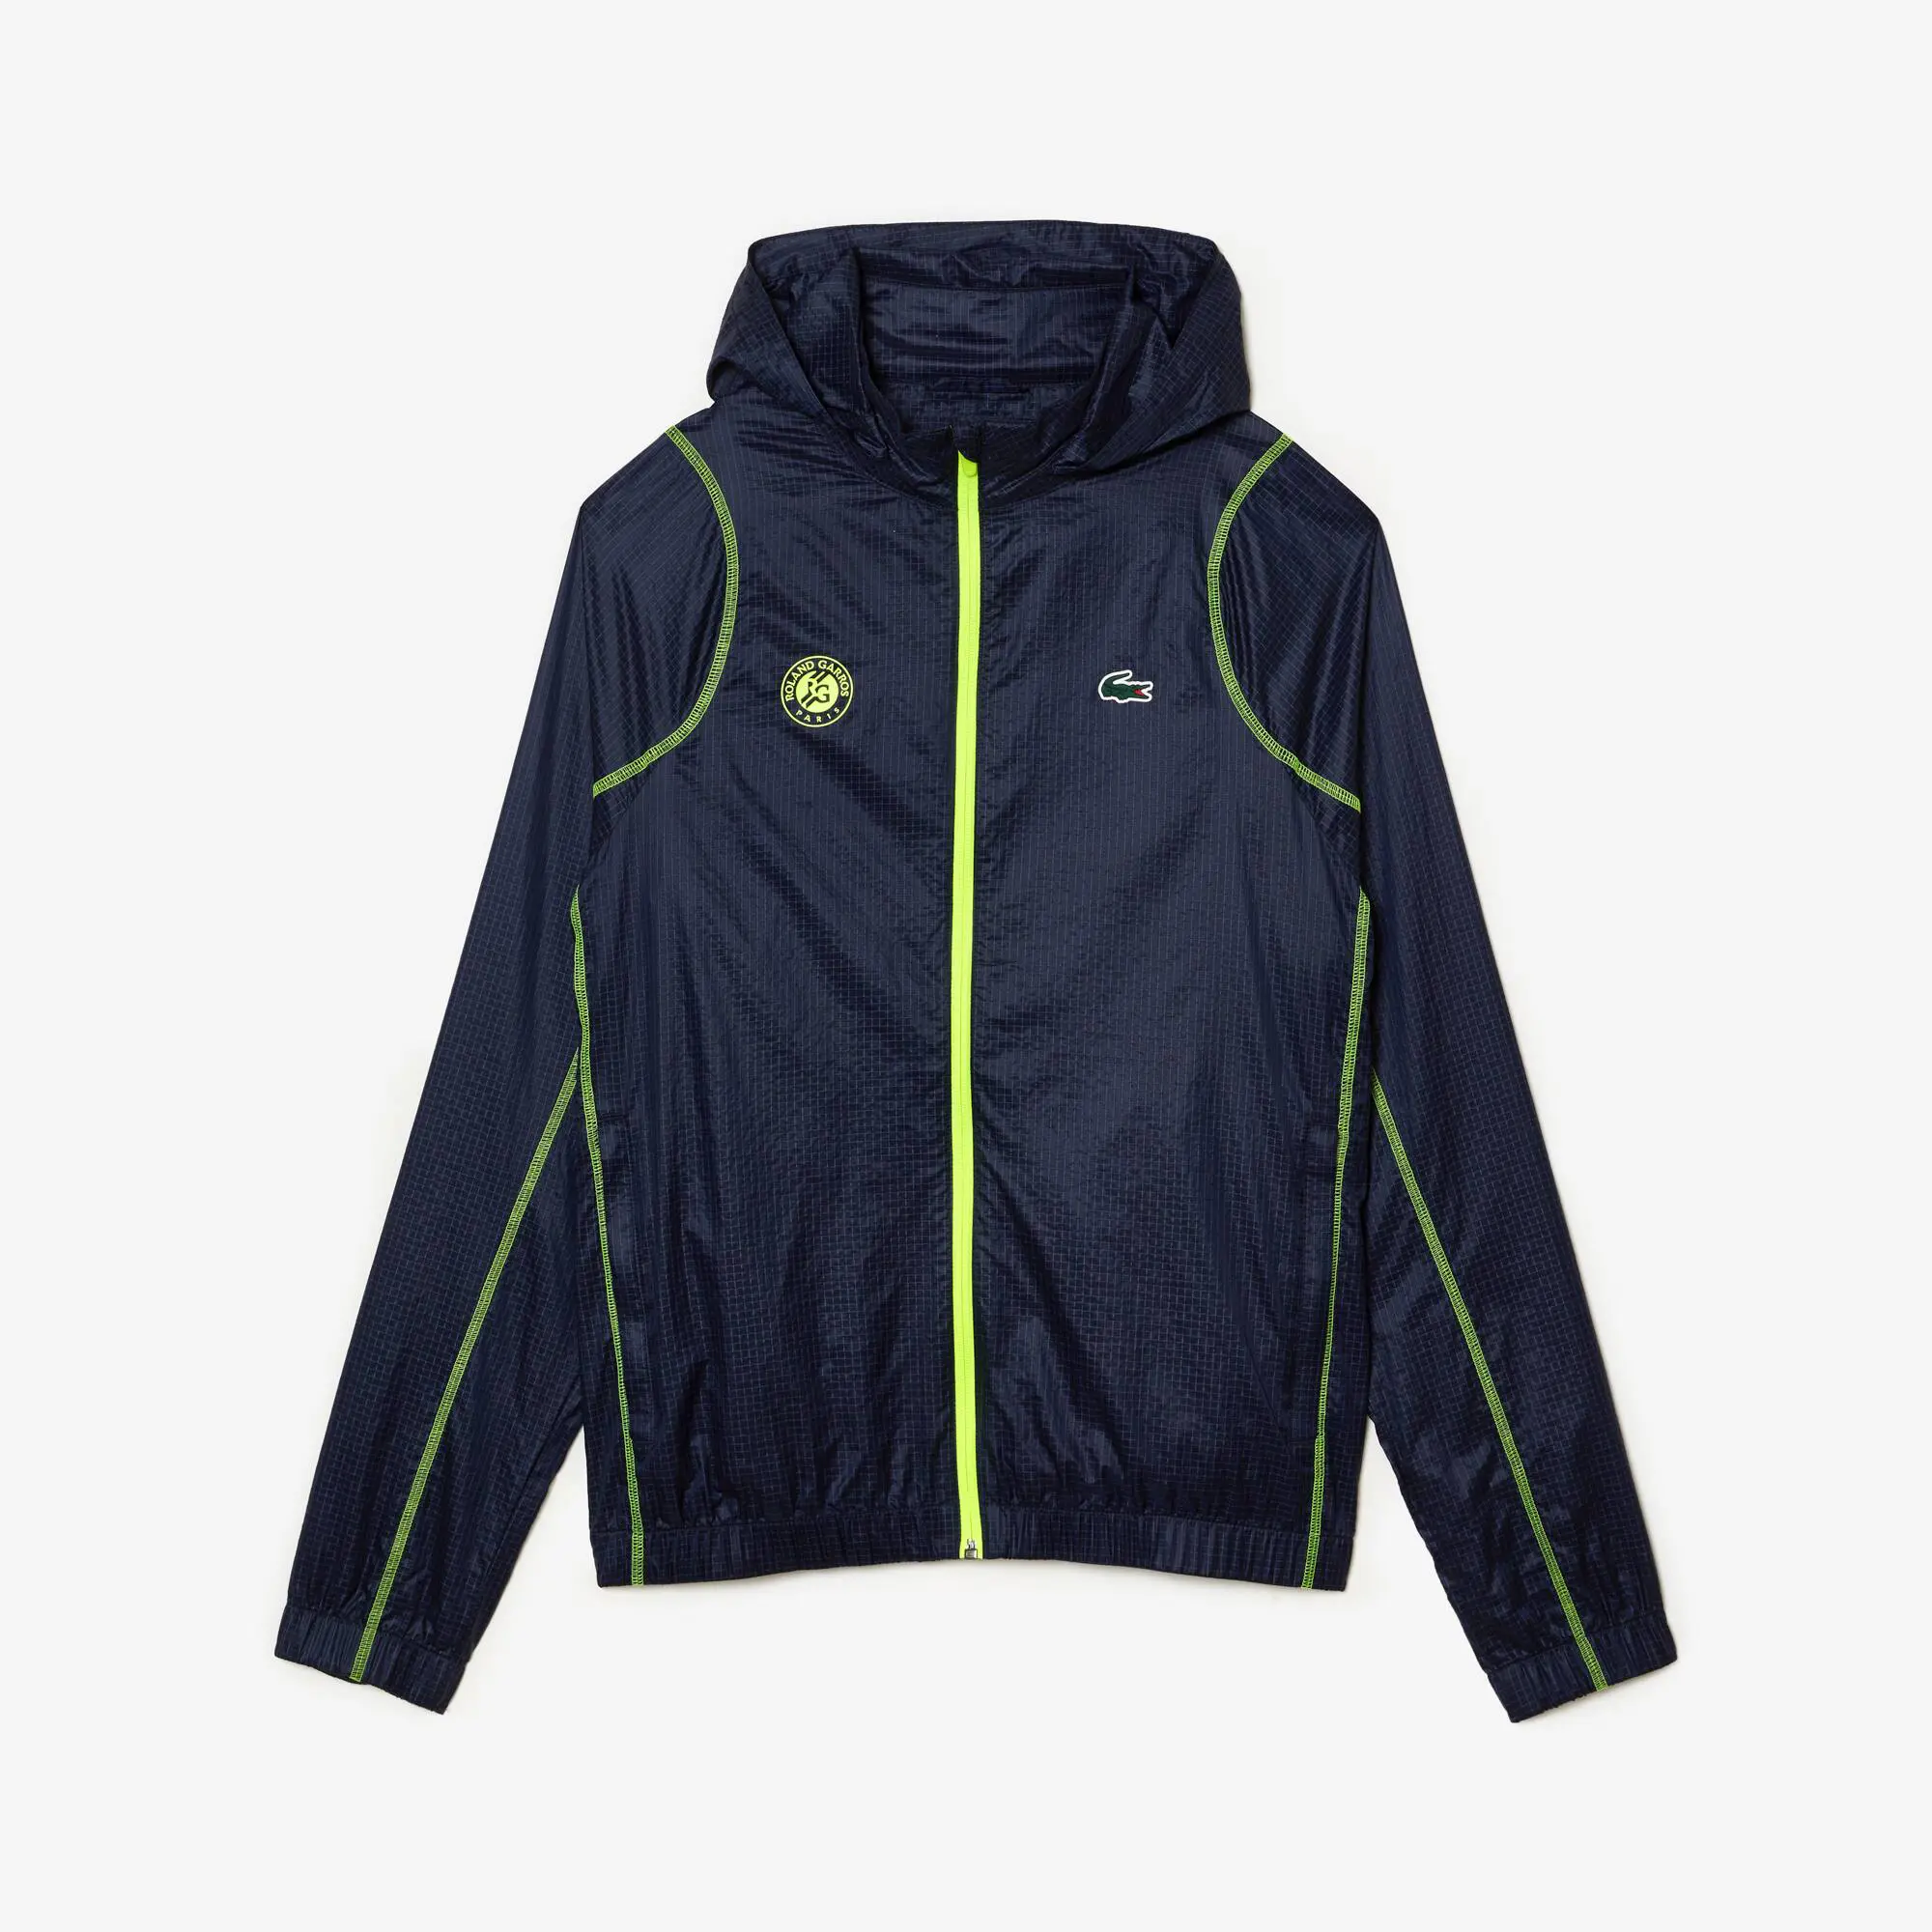 Lacoste Herren LACOSTE SPORT French Open Edition After-Match Jacke. 2